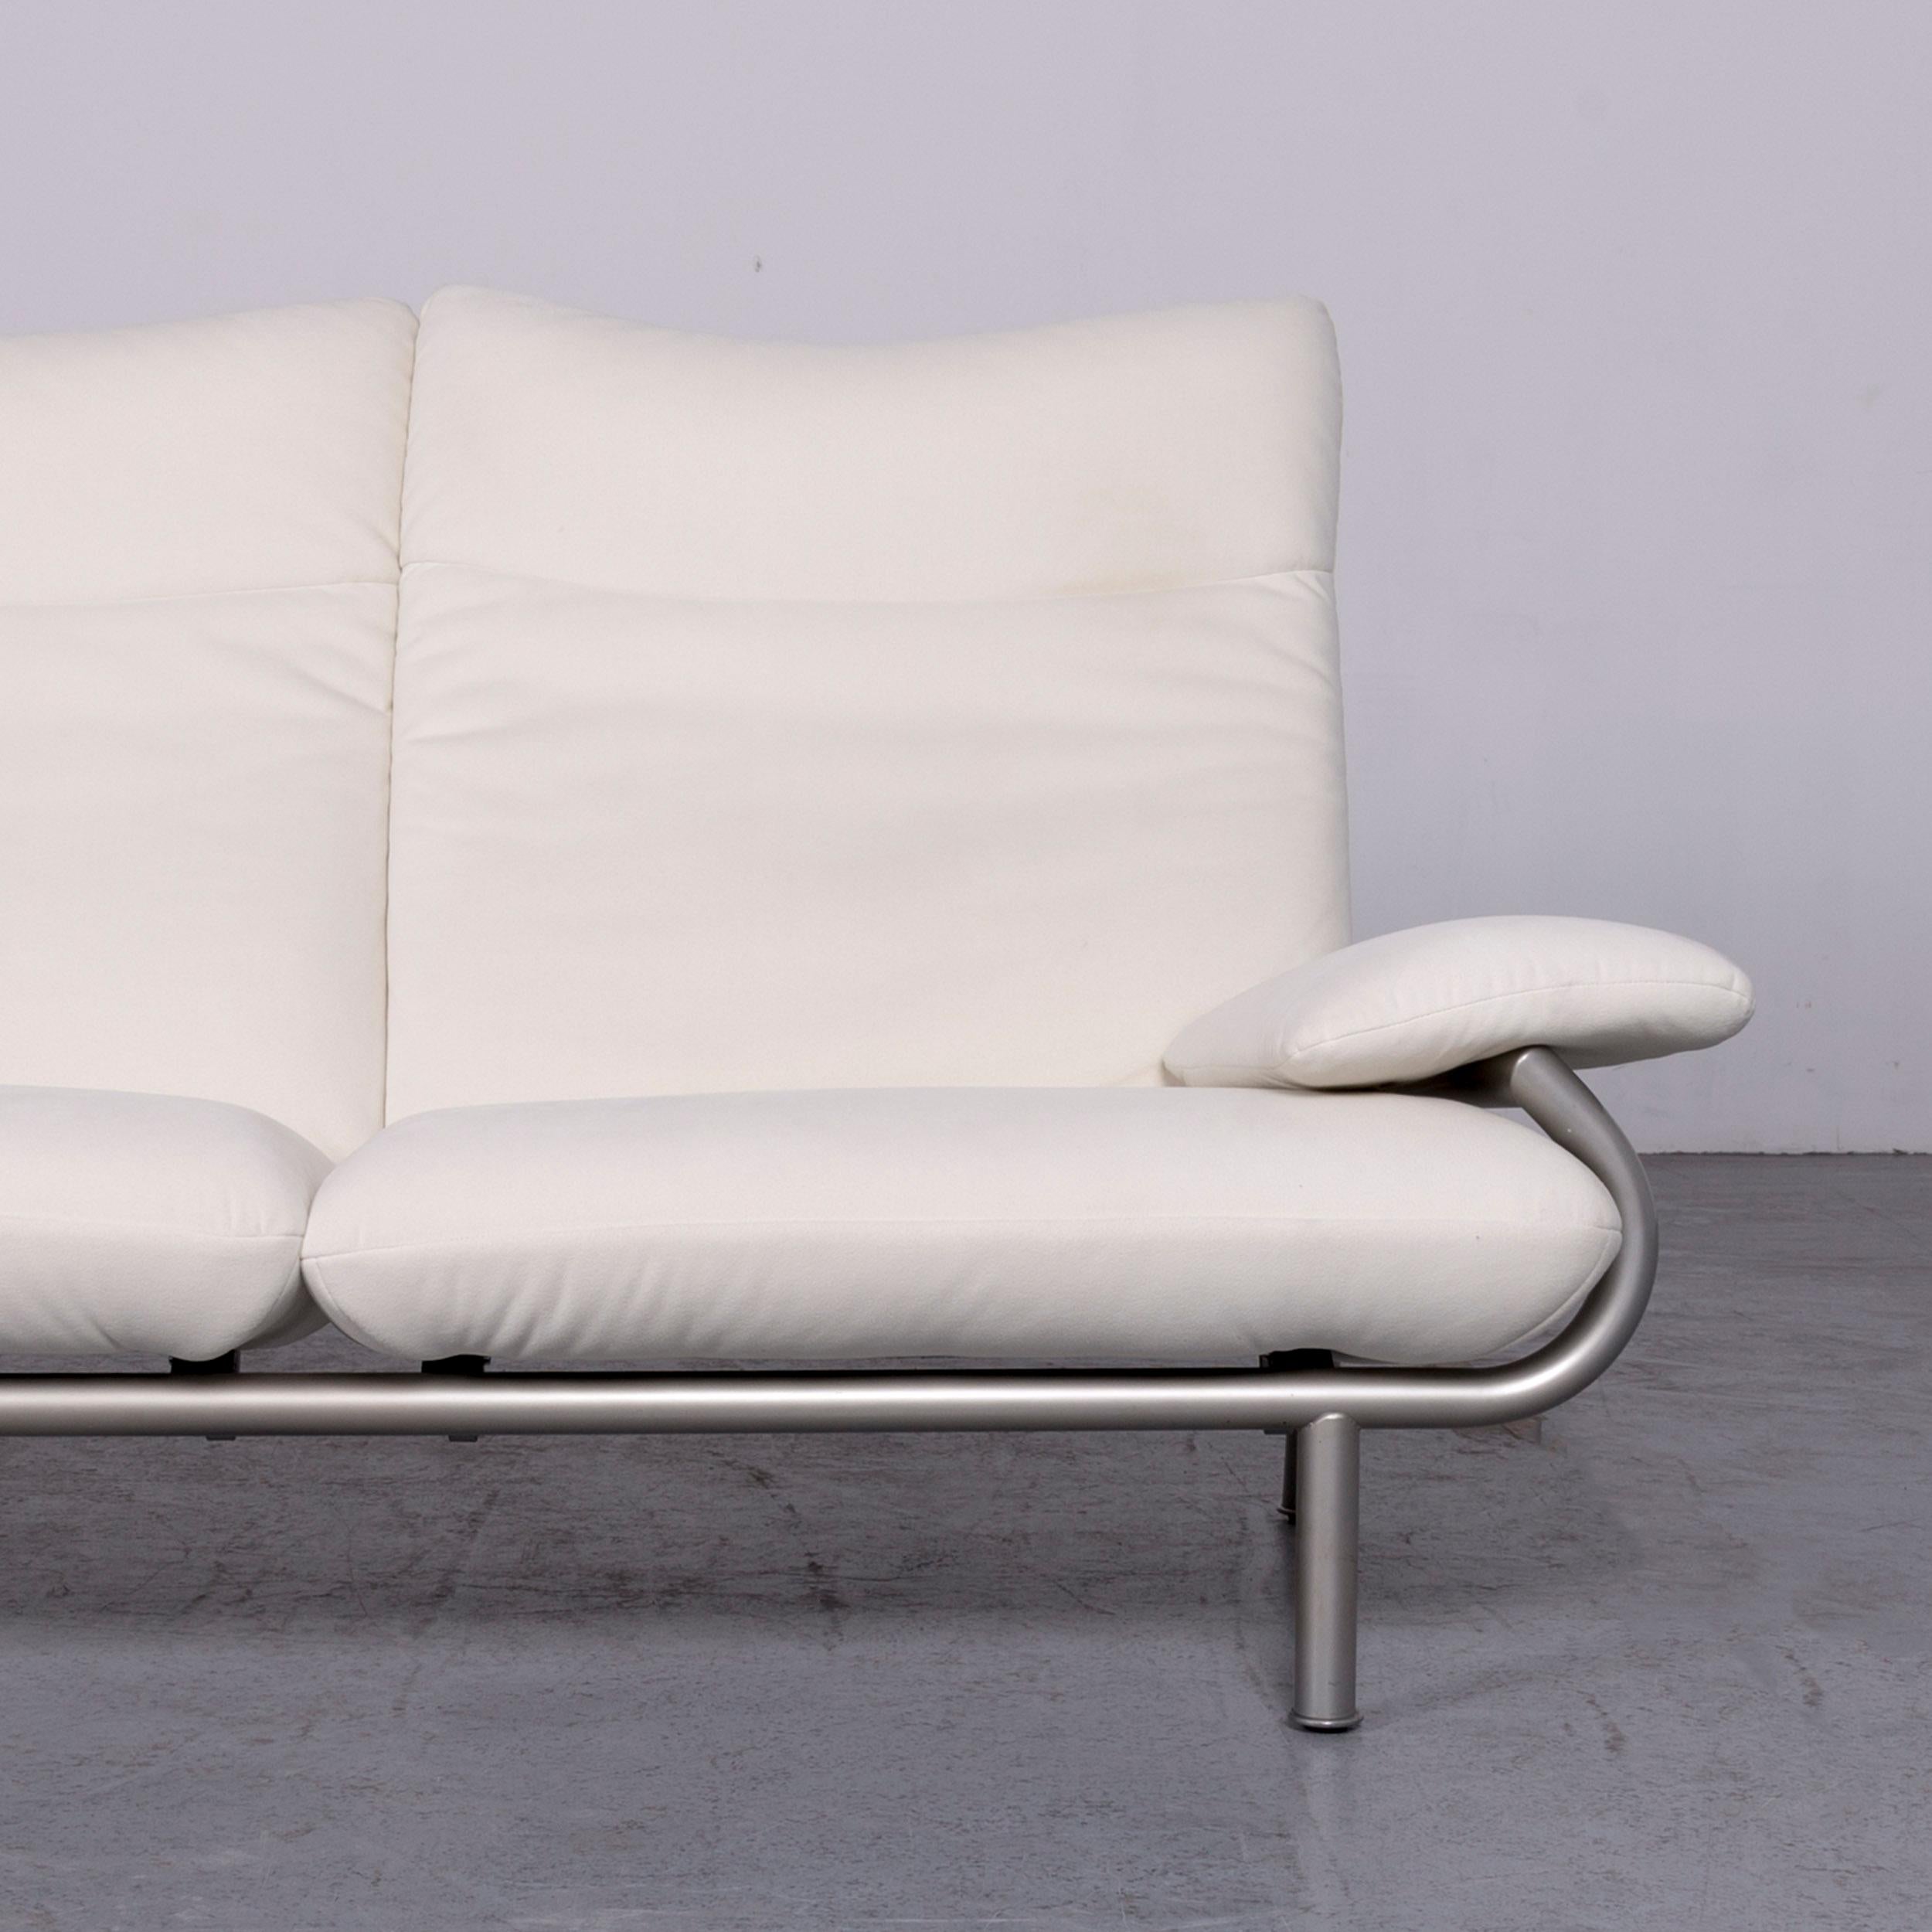 Laauser Designer Fabric Sofa White Two-Seat Couch In Good Condition For Sale In Cologne, DE